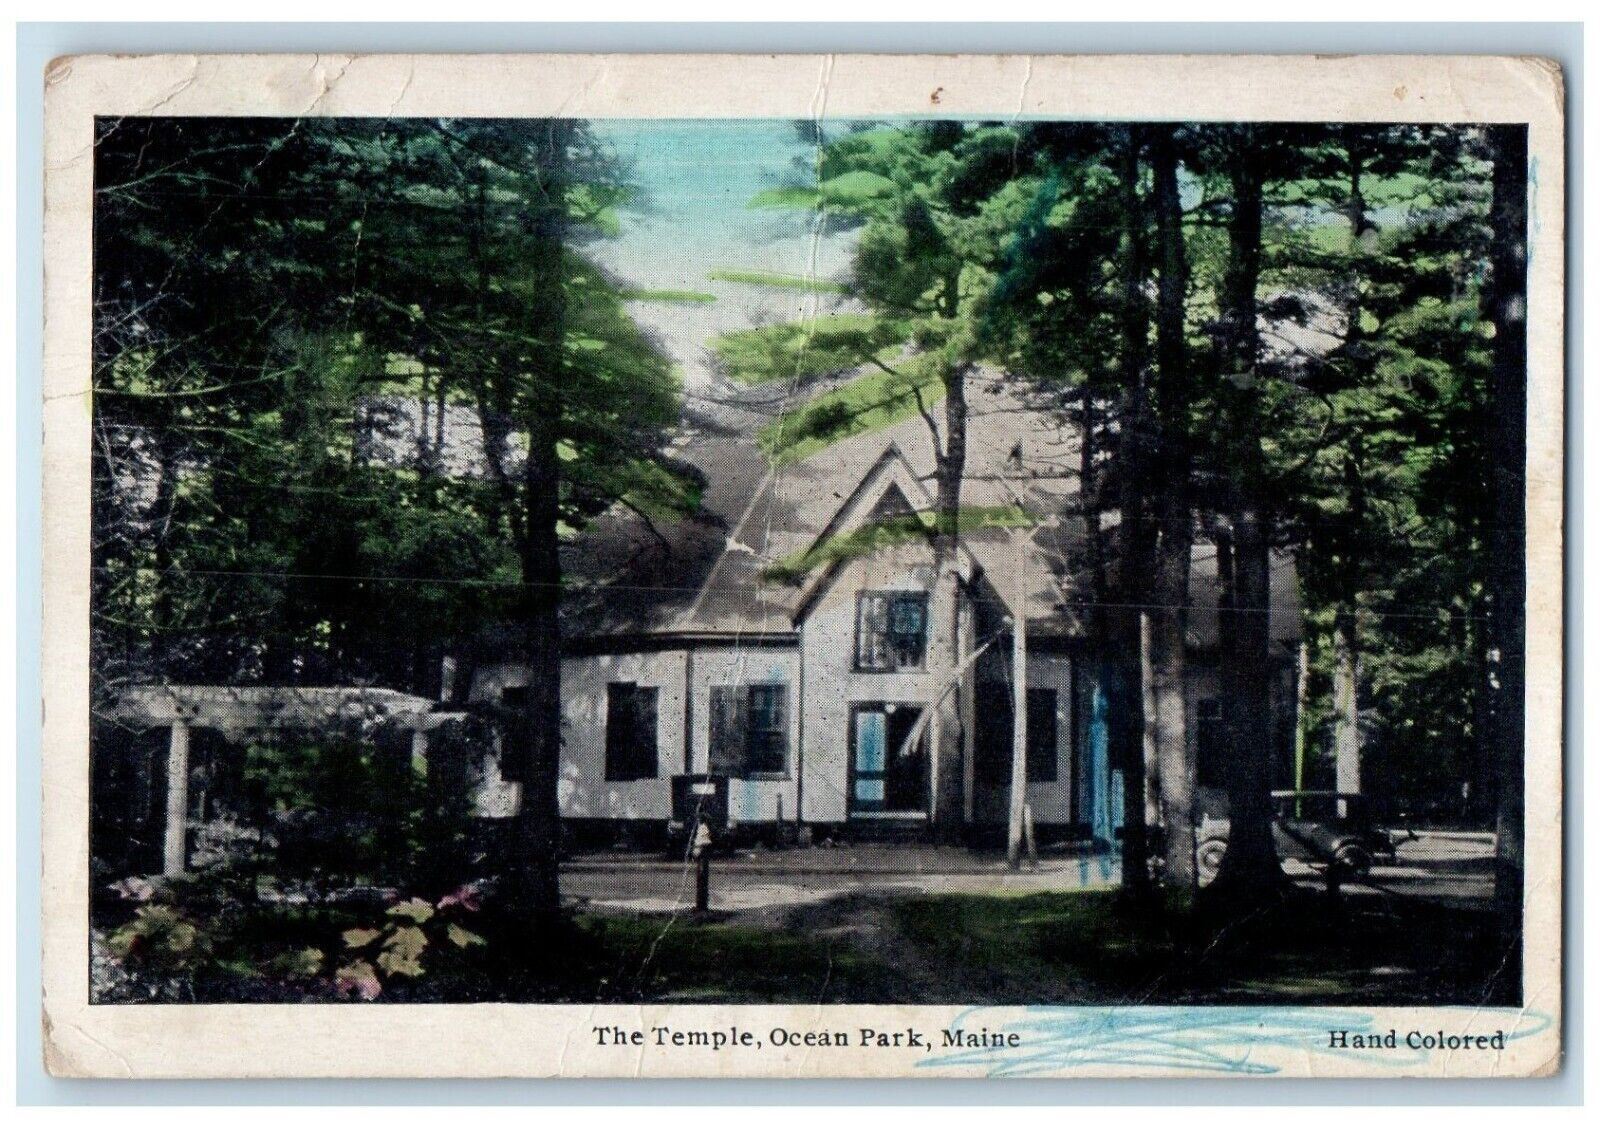 1934 The Temple Ocean Park Maine ME, Hancolored Posted Vintage Postcard